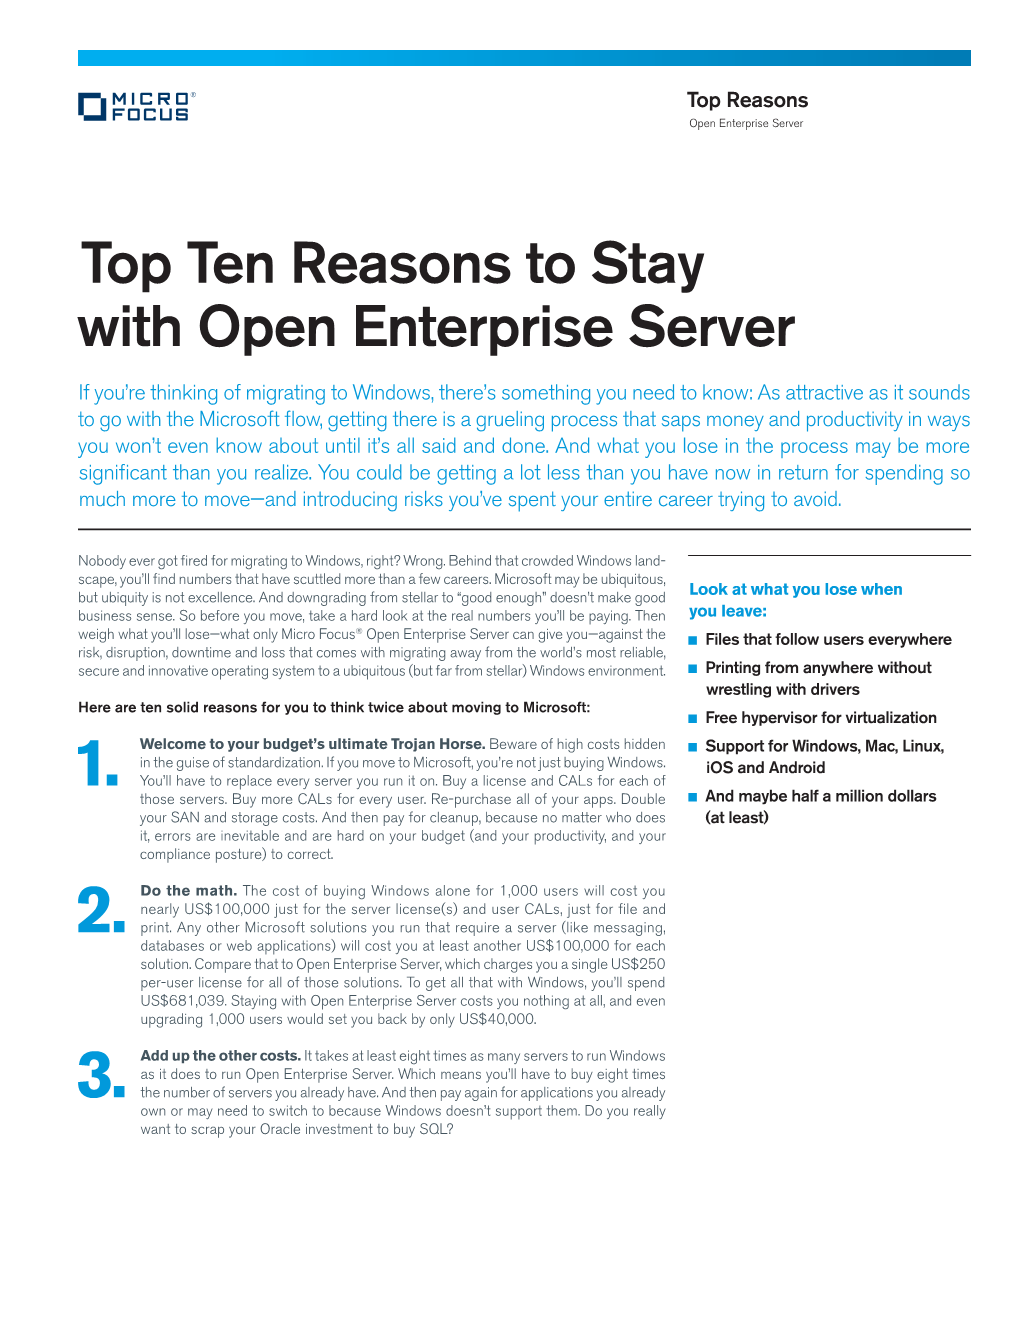 Top Ten Reasons to Stay with Open Enterprise Server